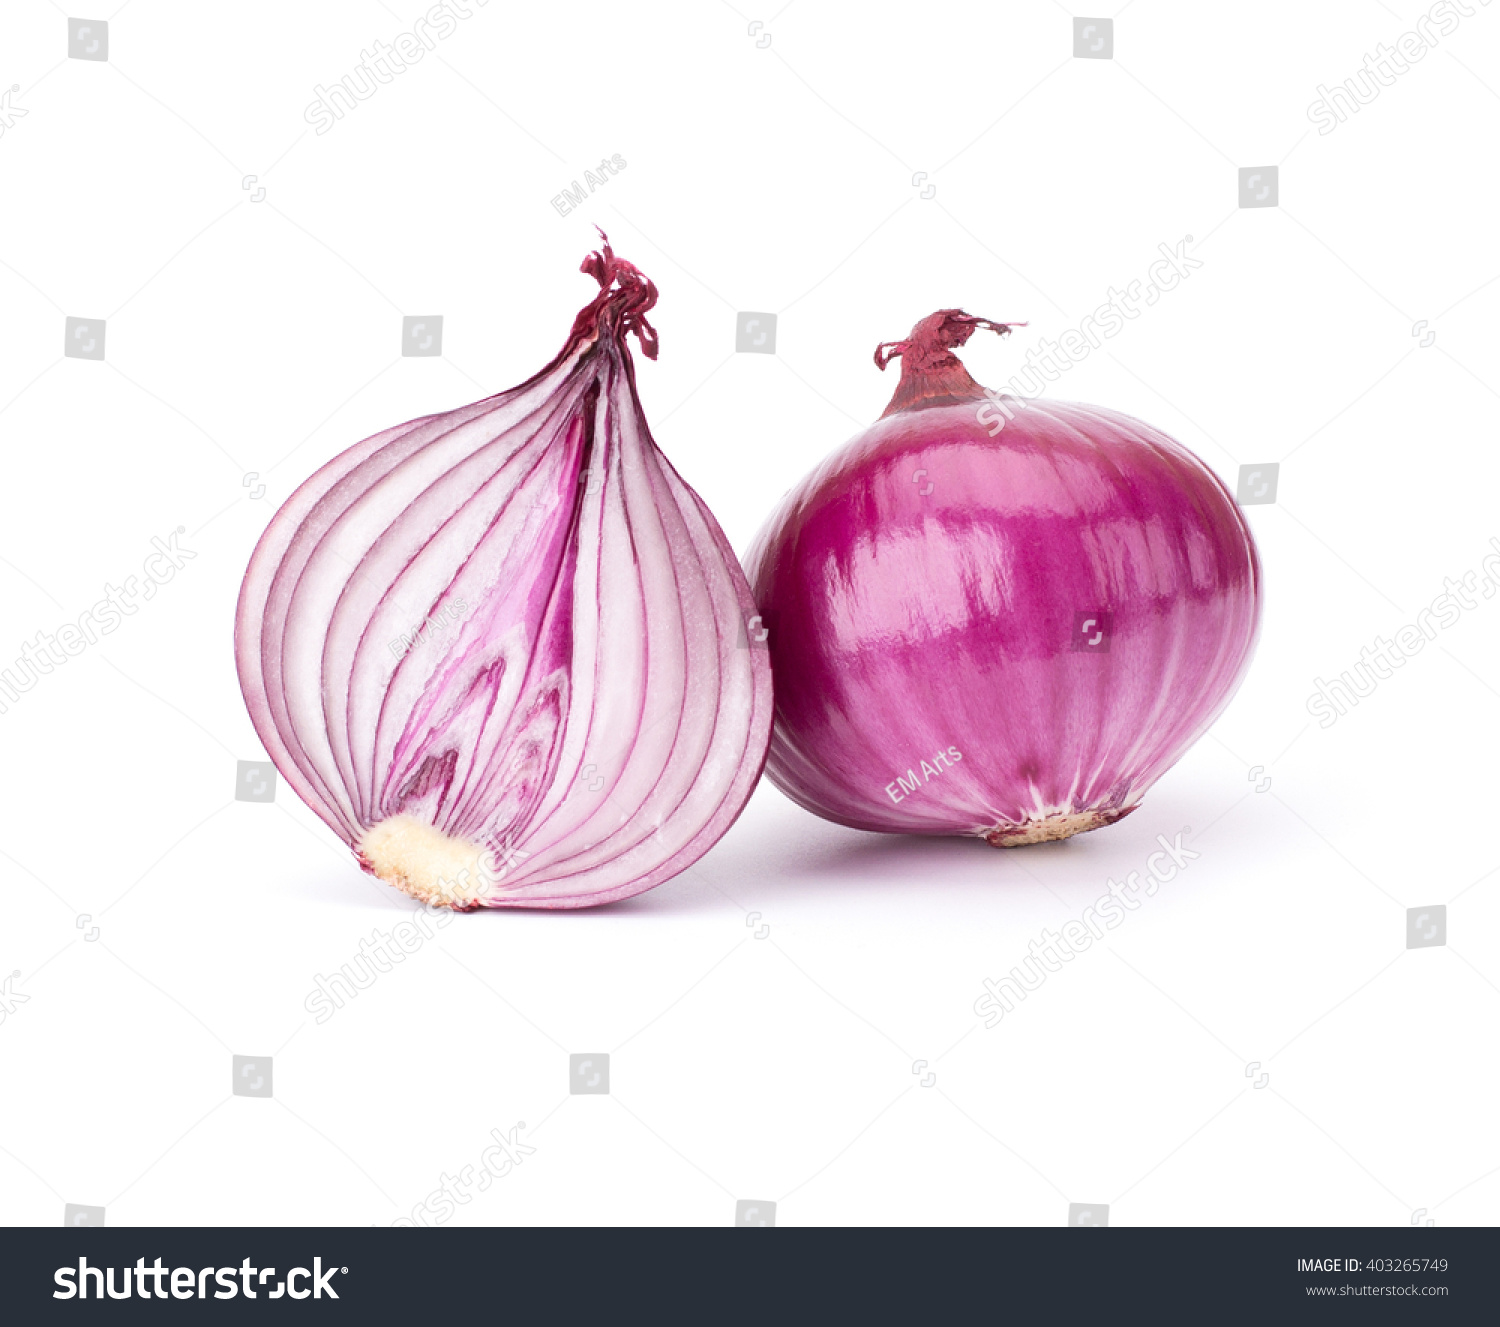 Red Onion Cut Halves Isolated On Stock Photo 403265749 - Shutterstock